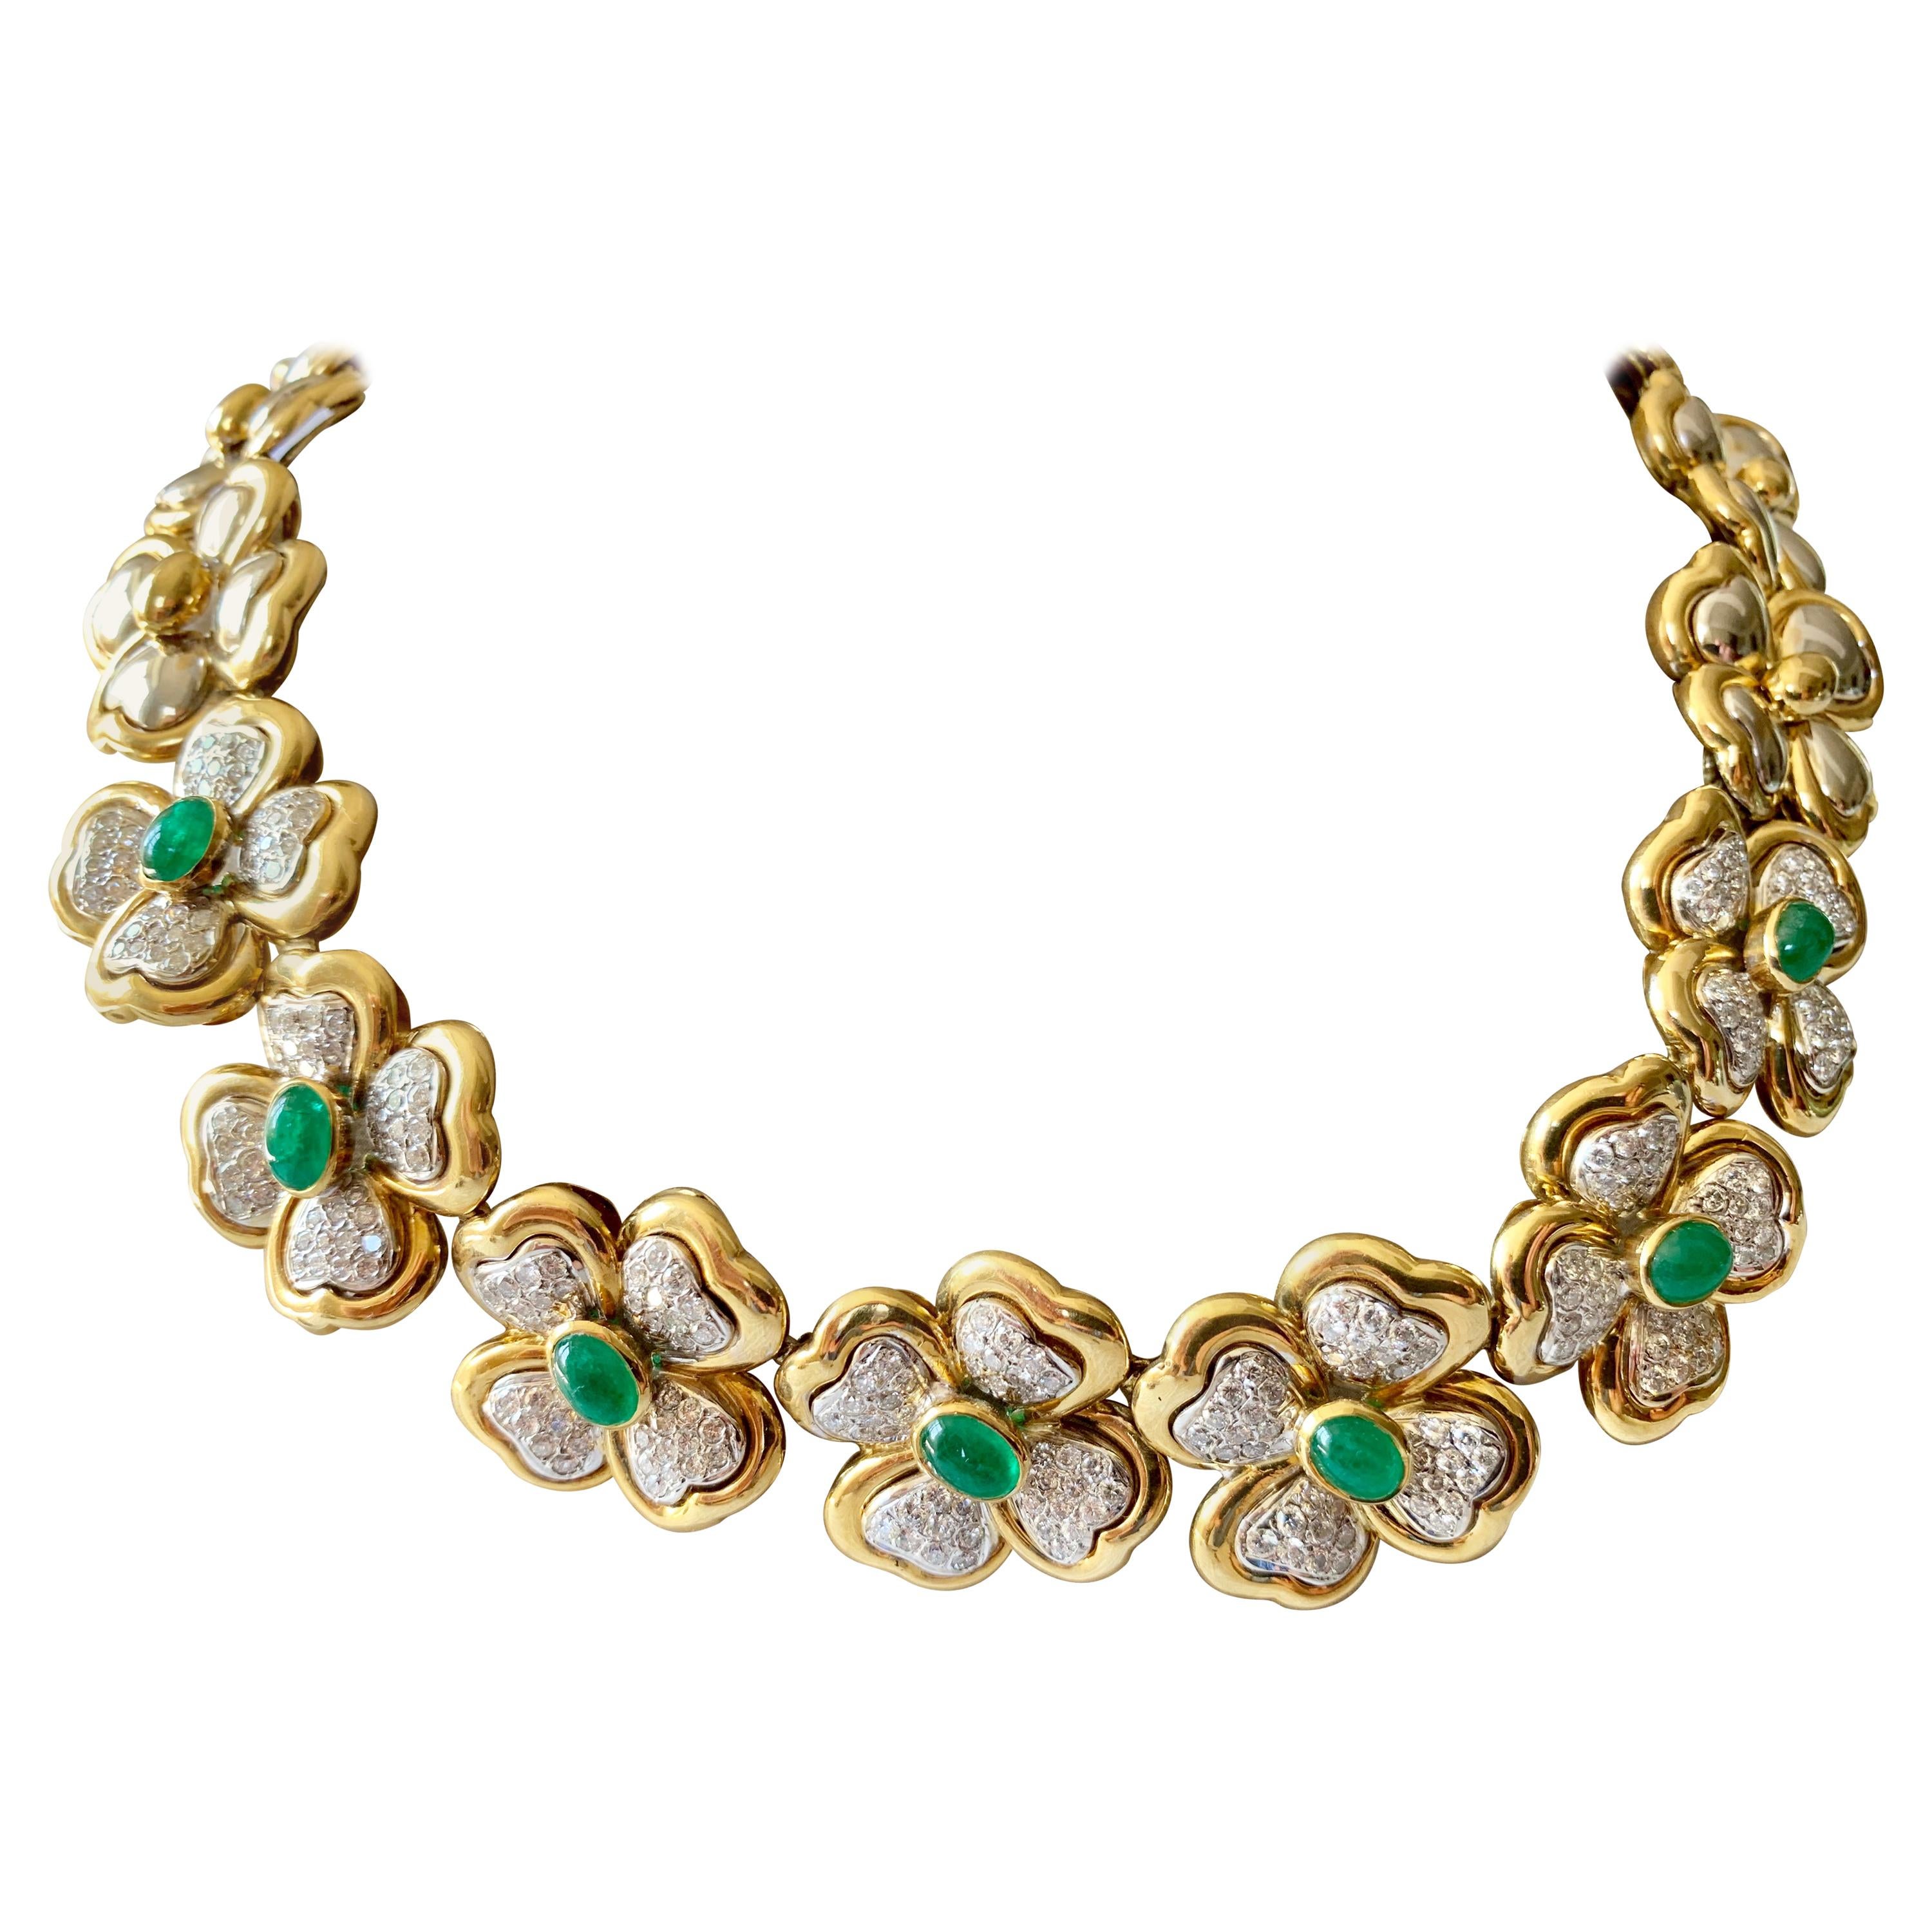 Elegant 18 K white and yellow gold necklace of floral design. Set with 7 Emerald cabochons weighing approximately 3.50 ct and 252 brillinat cut diamonds of circa 5 ct, H color and vs clarity. This stunning necklace lies beautifully on every lady's